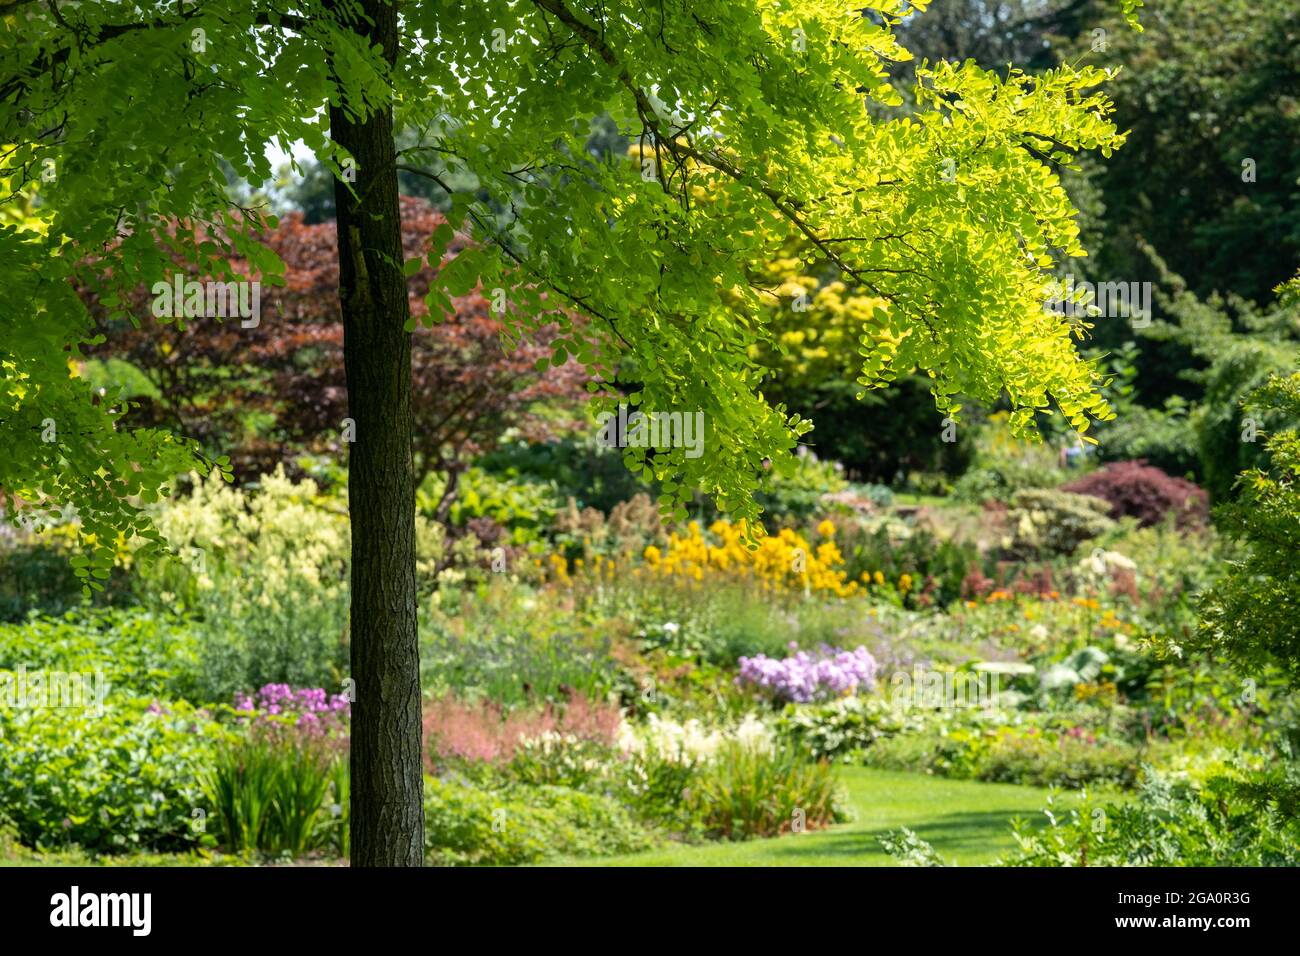 Bressingham Gardens near Diss in Norfolk. Colourful garden in the naturalistic planting style with broad colour palette. Gleditsia tree in foreground. Stock Photo